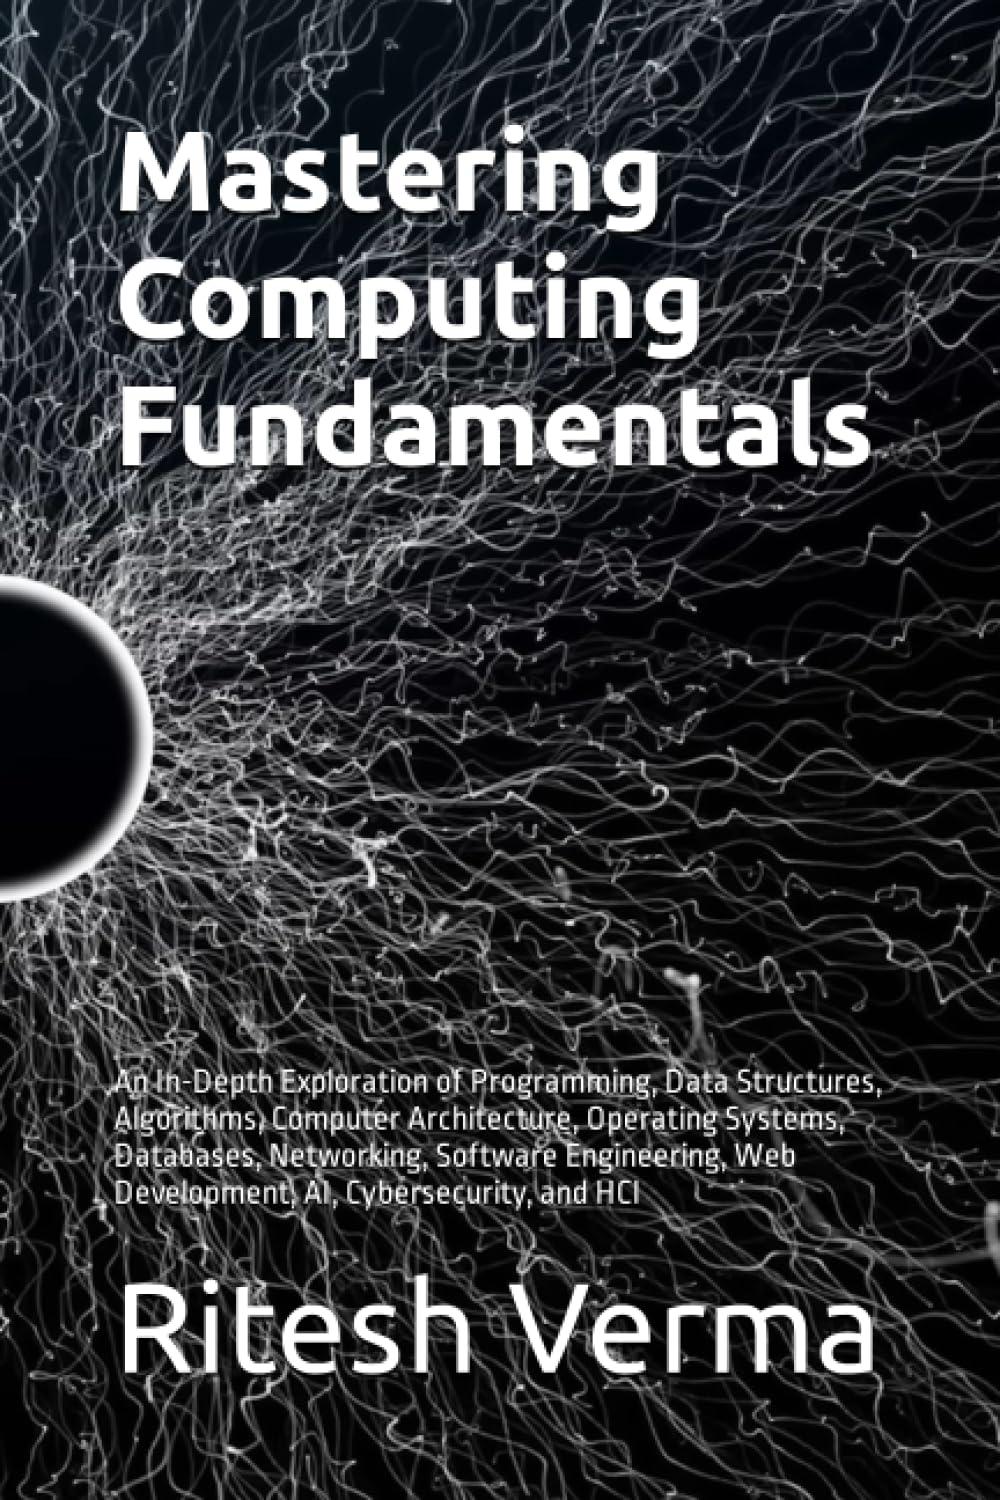 Mastering Computing Fundamentals An In Depth Exploration Of Programming Data Structures Algorithms Computer Architecture Operating Systems Web Development AI Cybersecurity And HCI